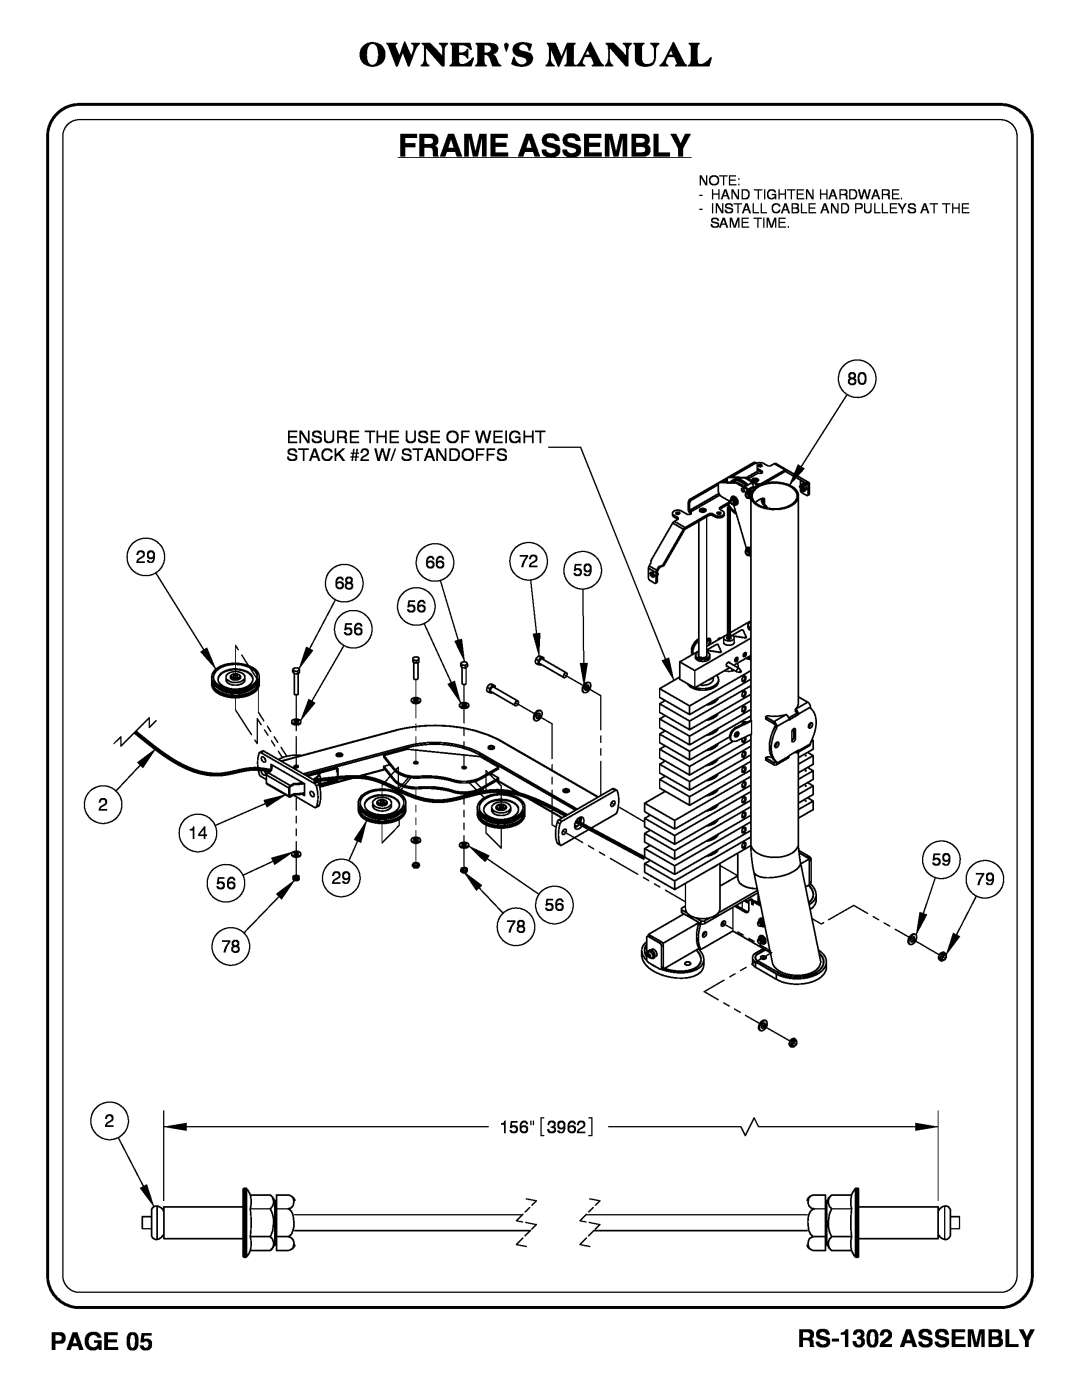 Hoist Fitness Owners Manual Frame Assembly, RS-1302 ASSEMBLY, ENSURE THE USE OF WEIGHT STACK #2 W/ STANDOFFS 